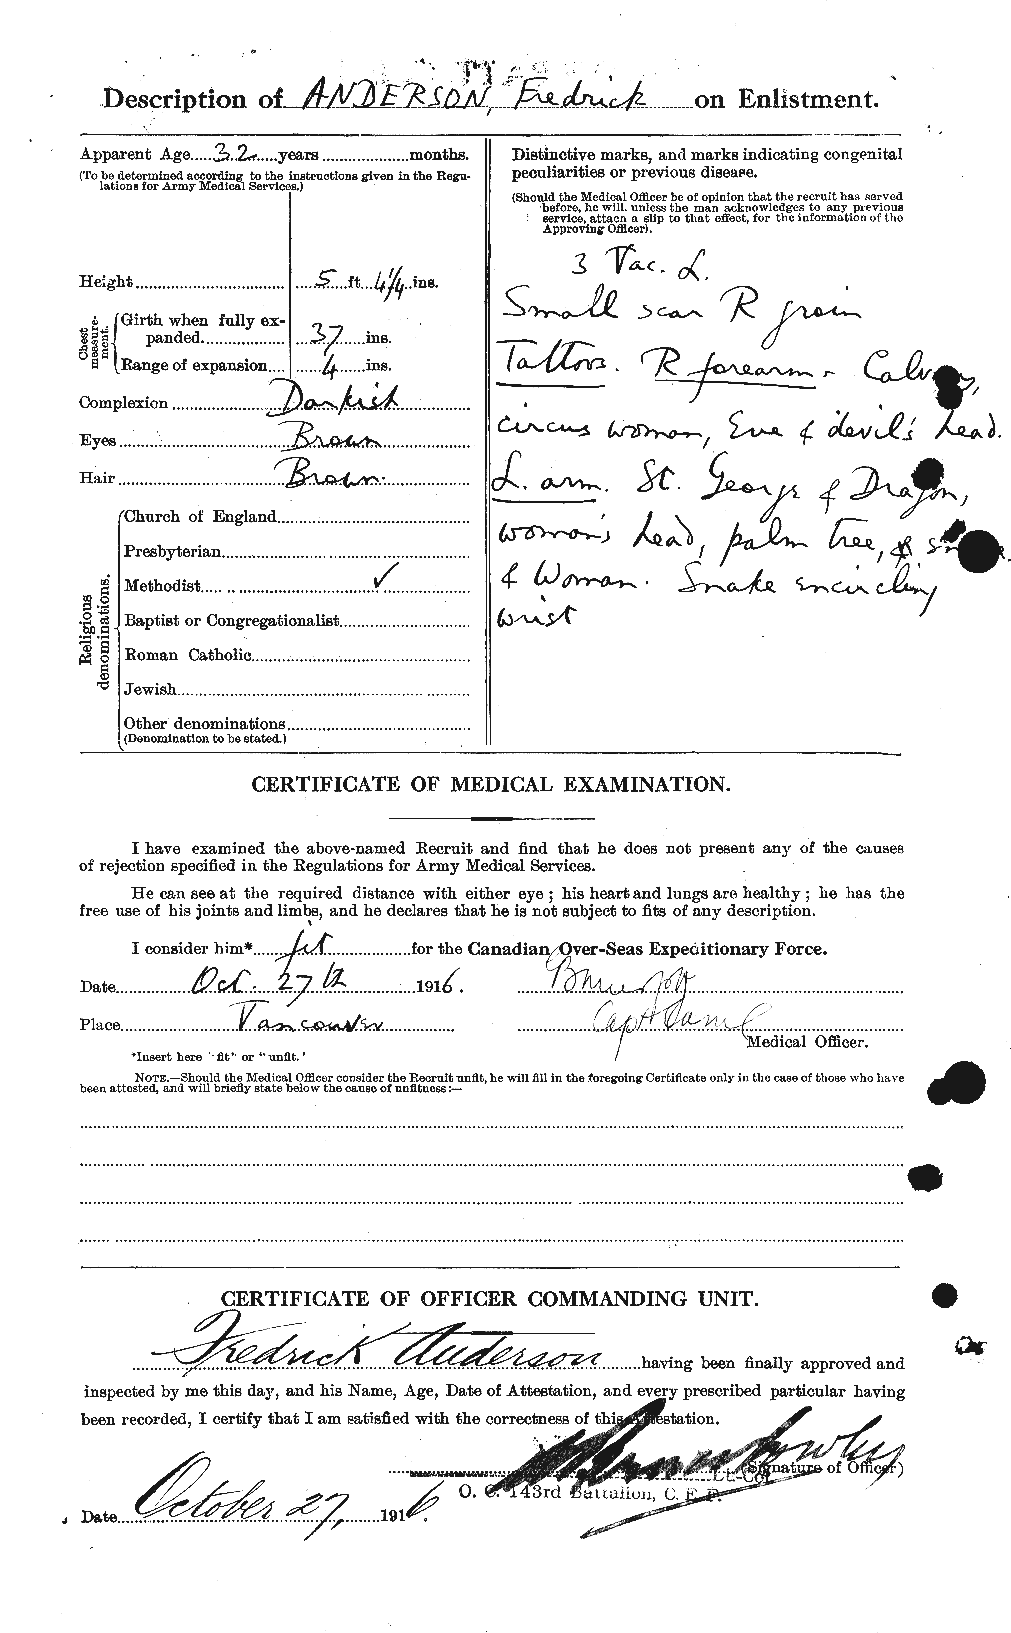 Personnel Records of the First World War - CEF 209825b